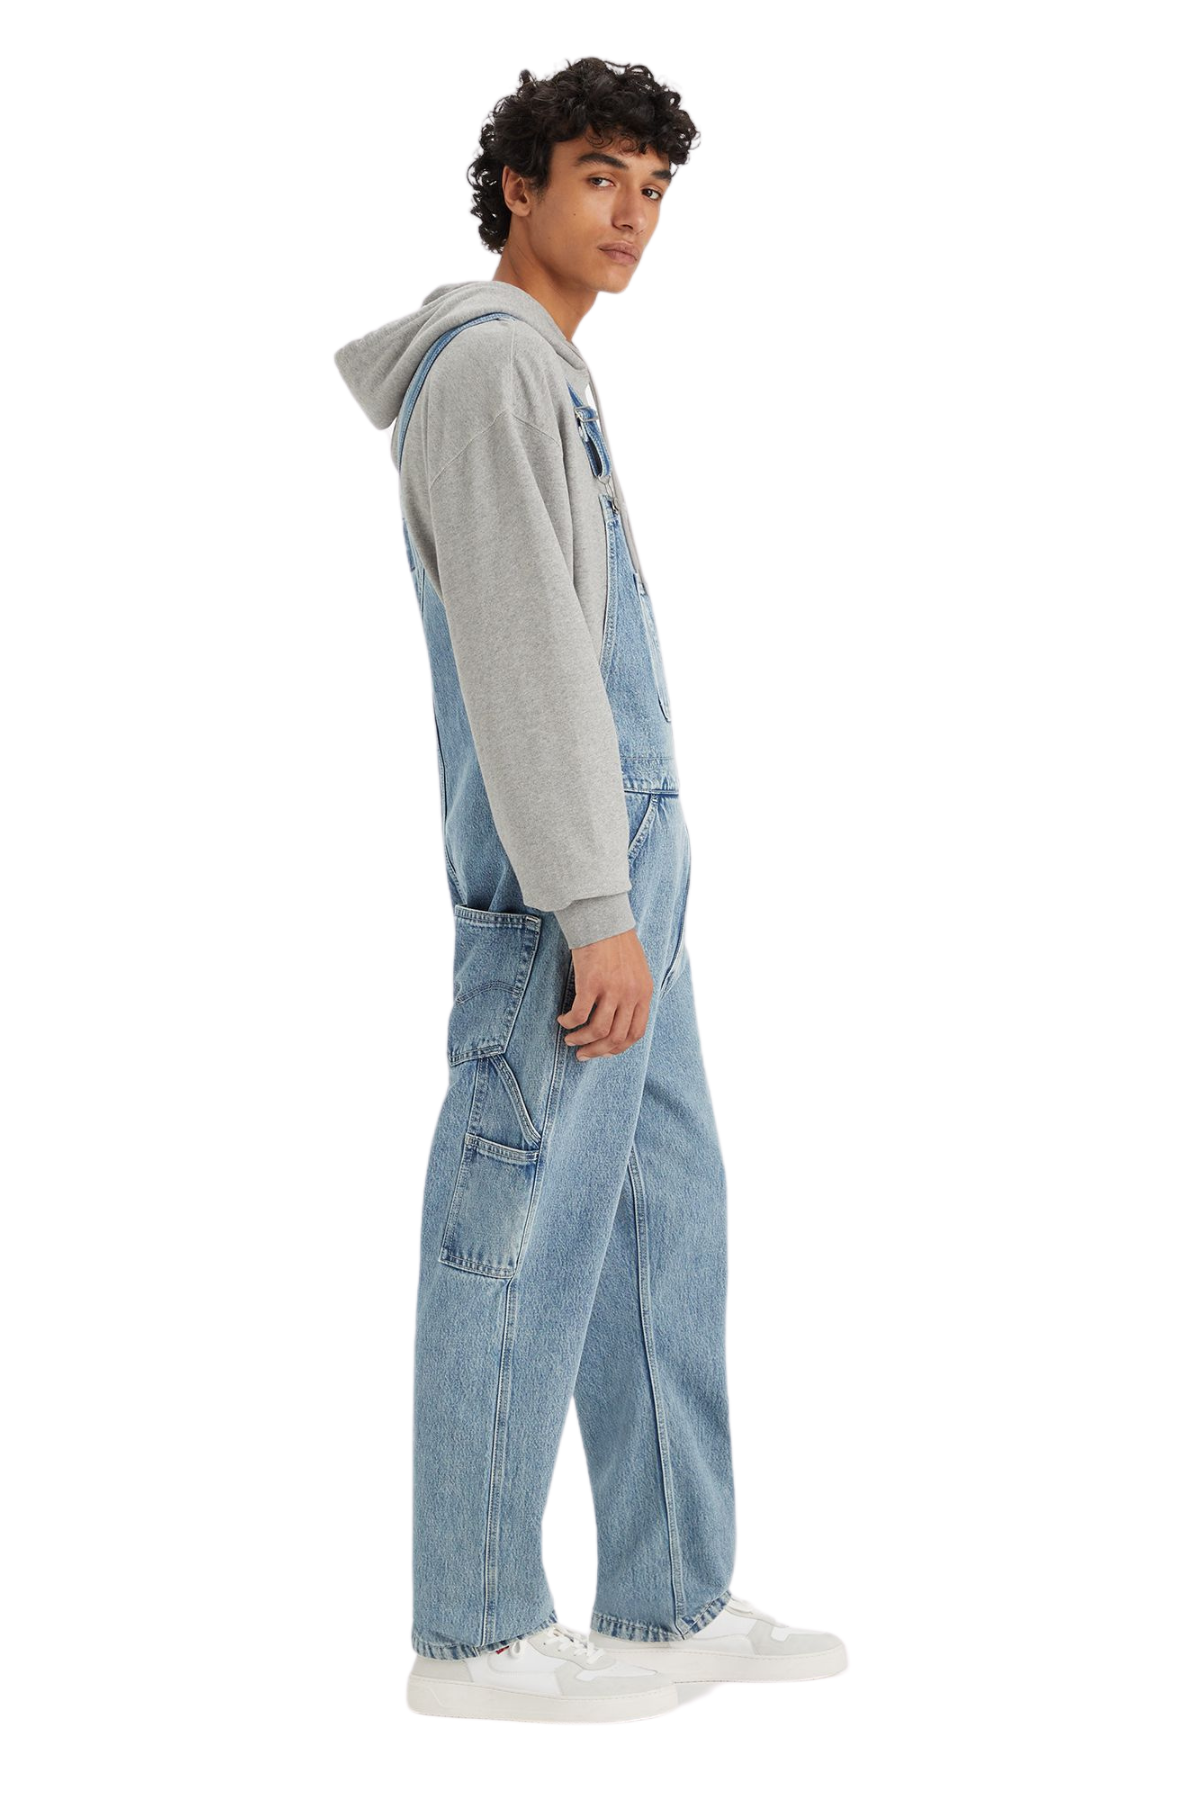 Levi's® Red Tab™ Put In Work Overall Denim Dungarees - Blue 